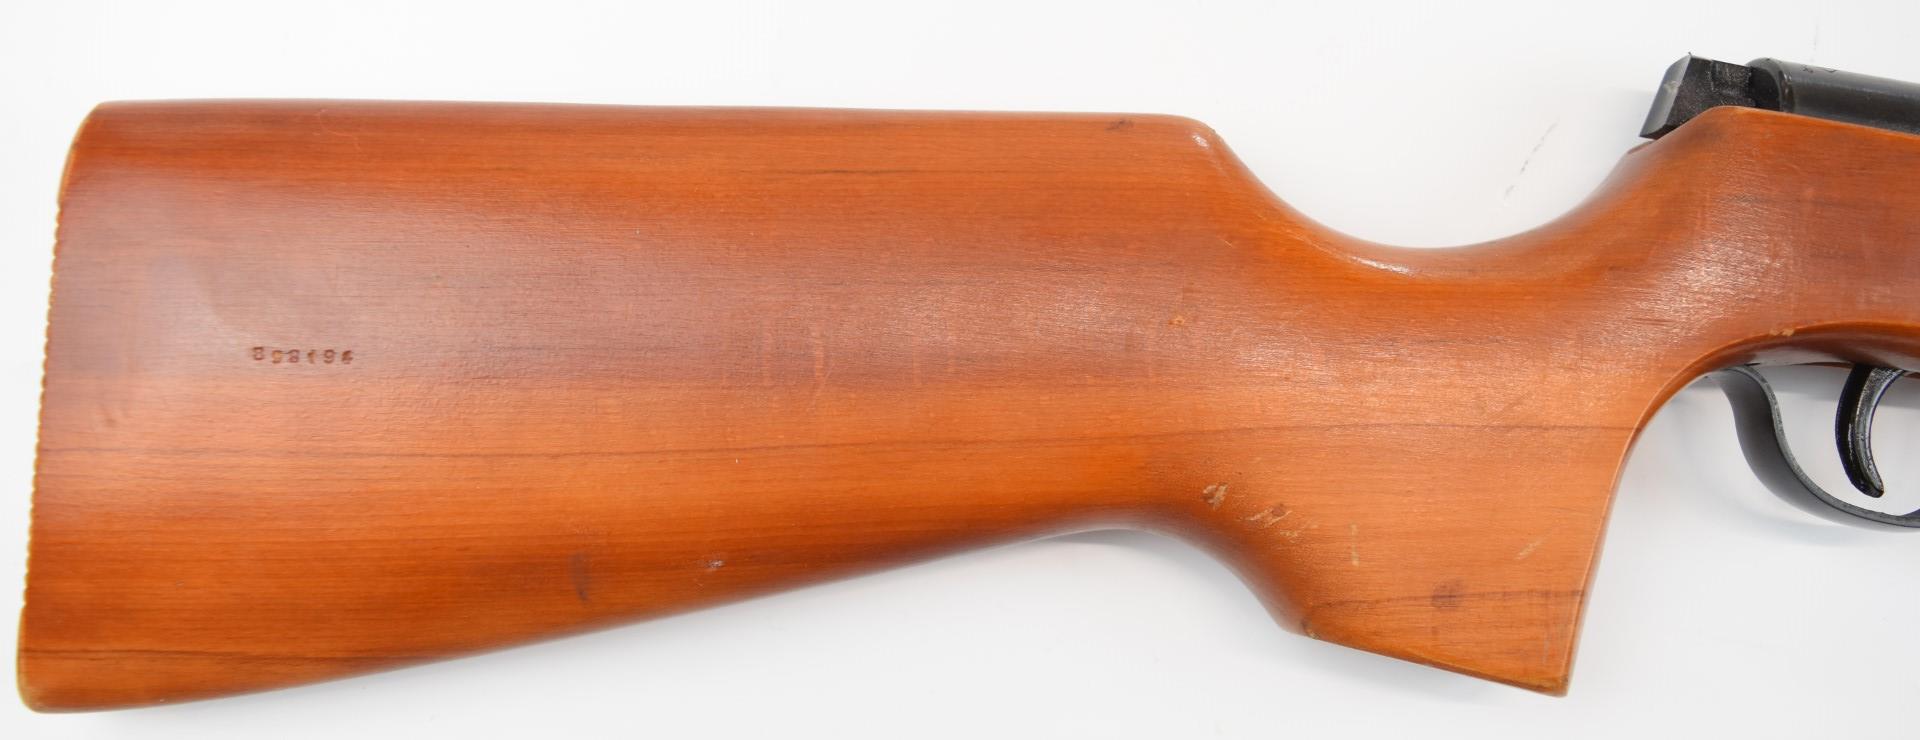 Haenel Model 310 lever-action 4.4mm calibre air rifle with semi-pistol grip, adjustable sights and - Image 3 of 19